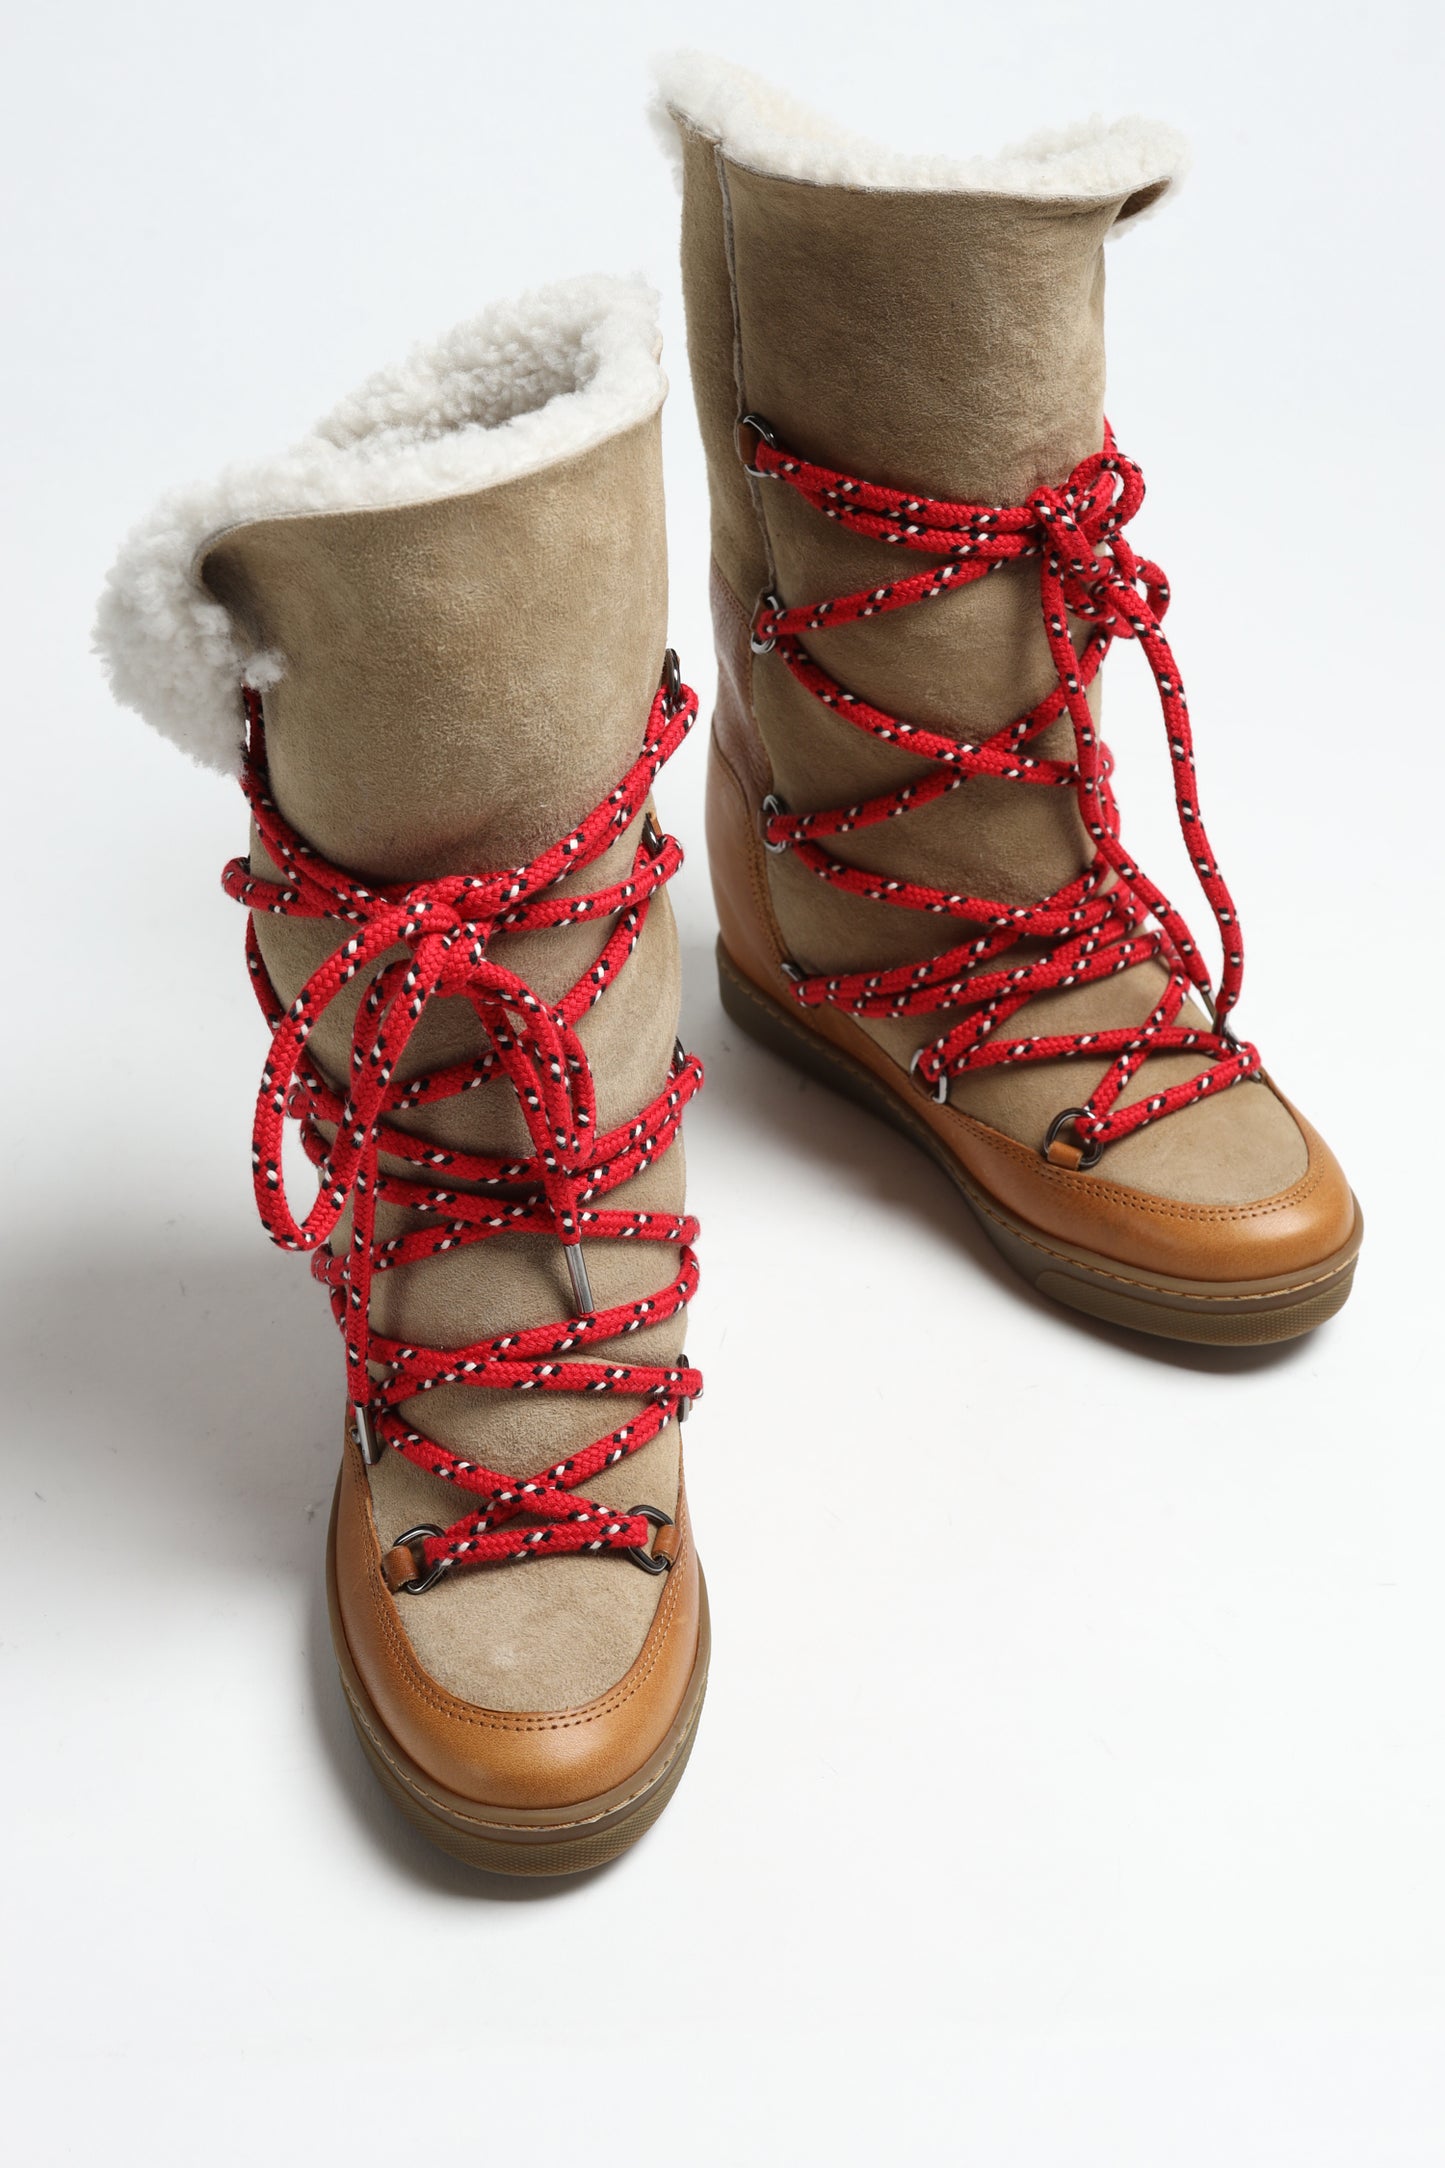 Boots Nowly in CamelIsabel Marant - Anita Hass